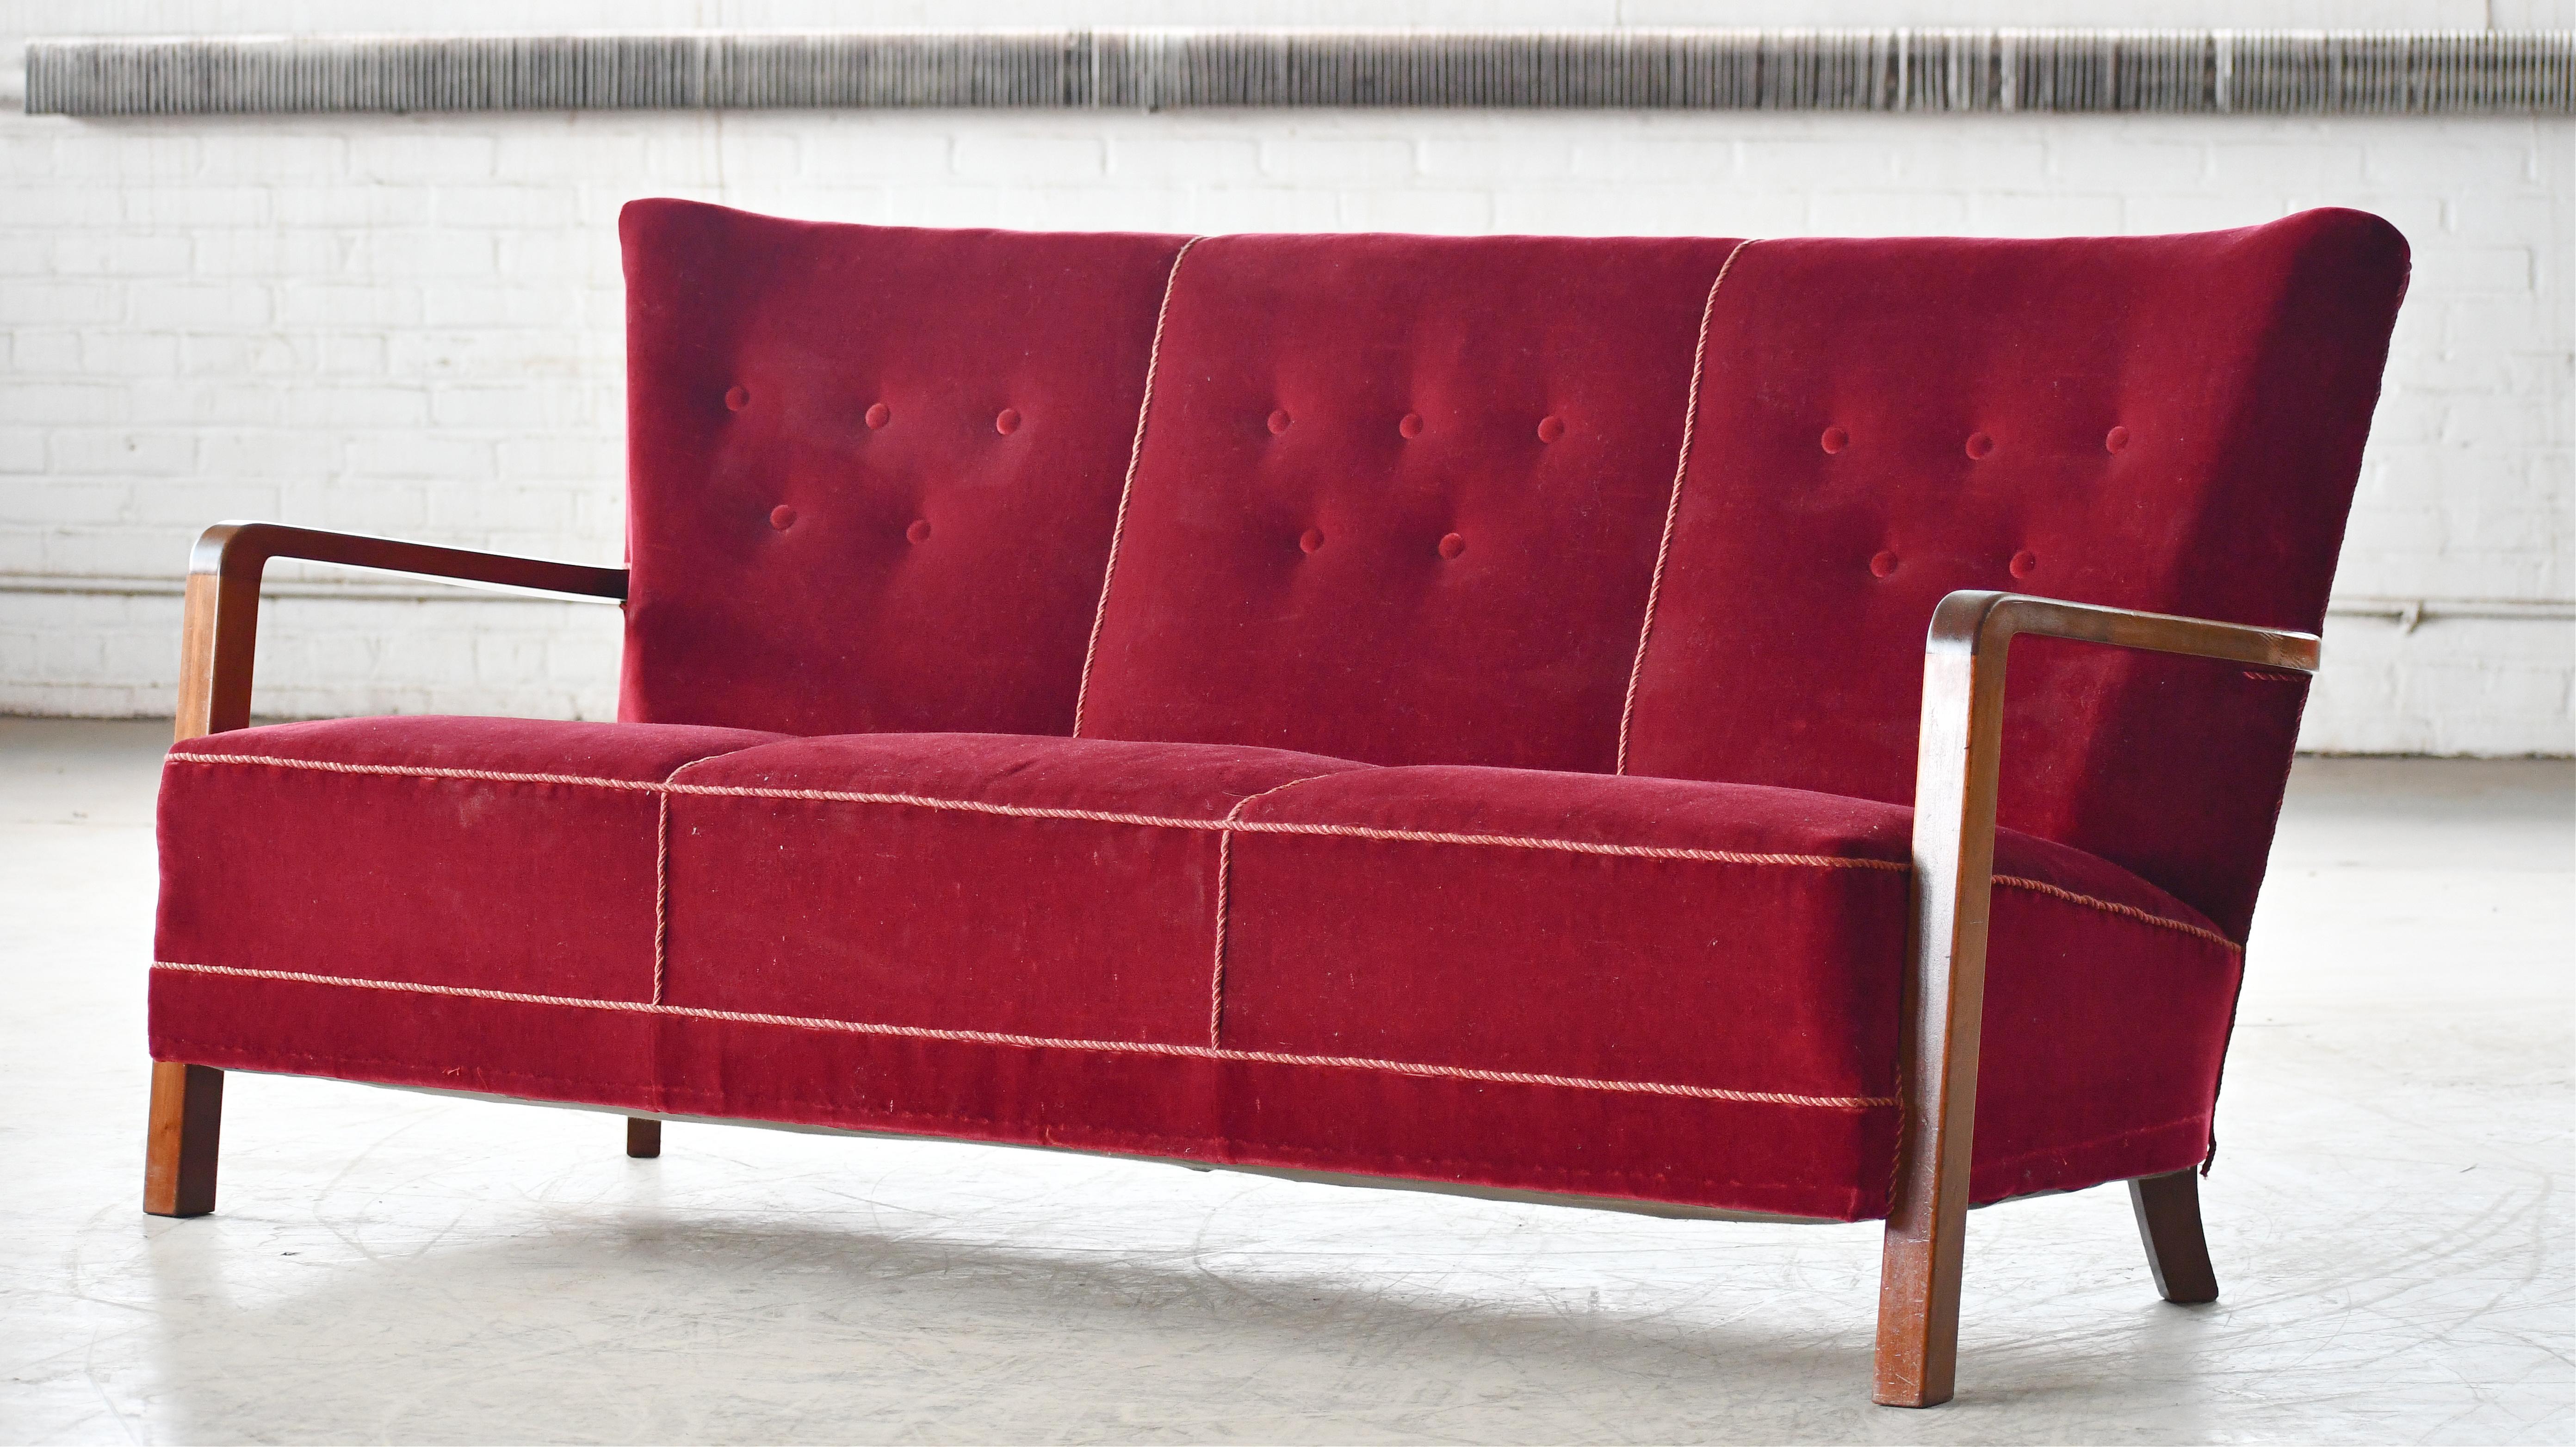 Wool Danish Art Deco or Early Midcentury Sofa with Open Wooden Armrests, 1930's For Sale